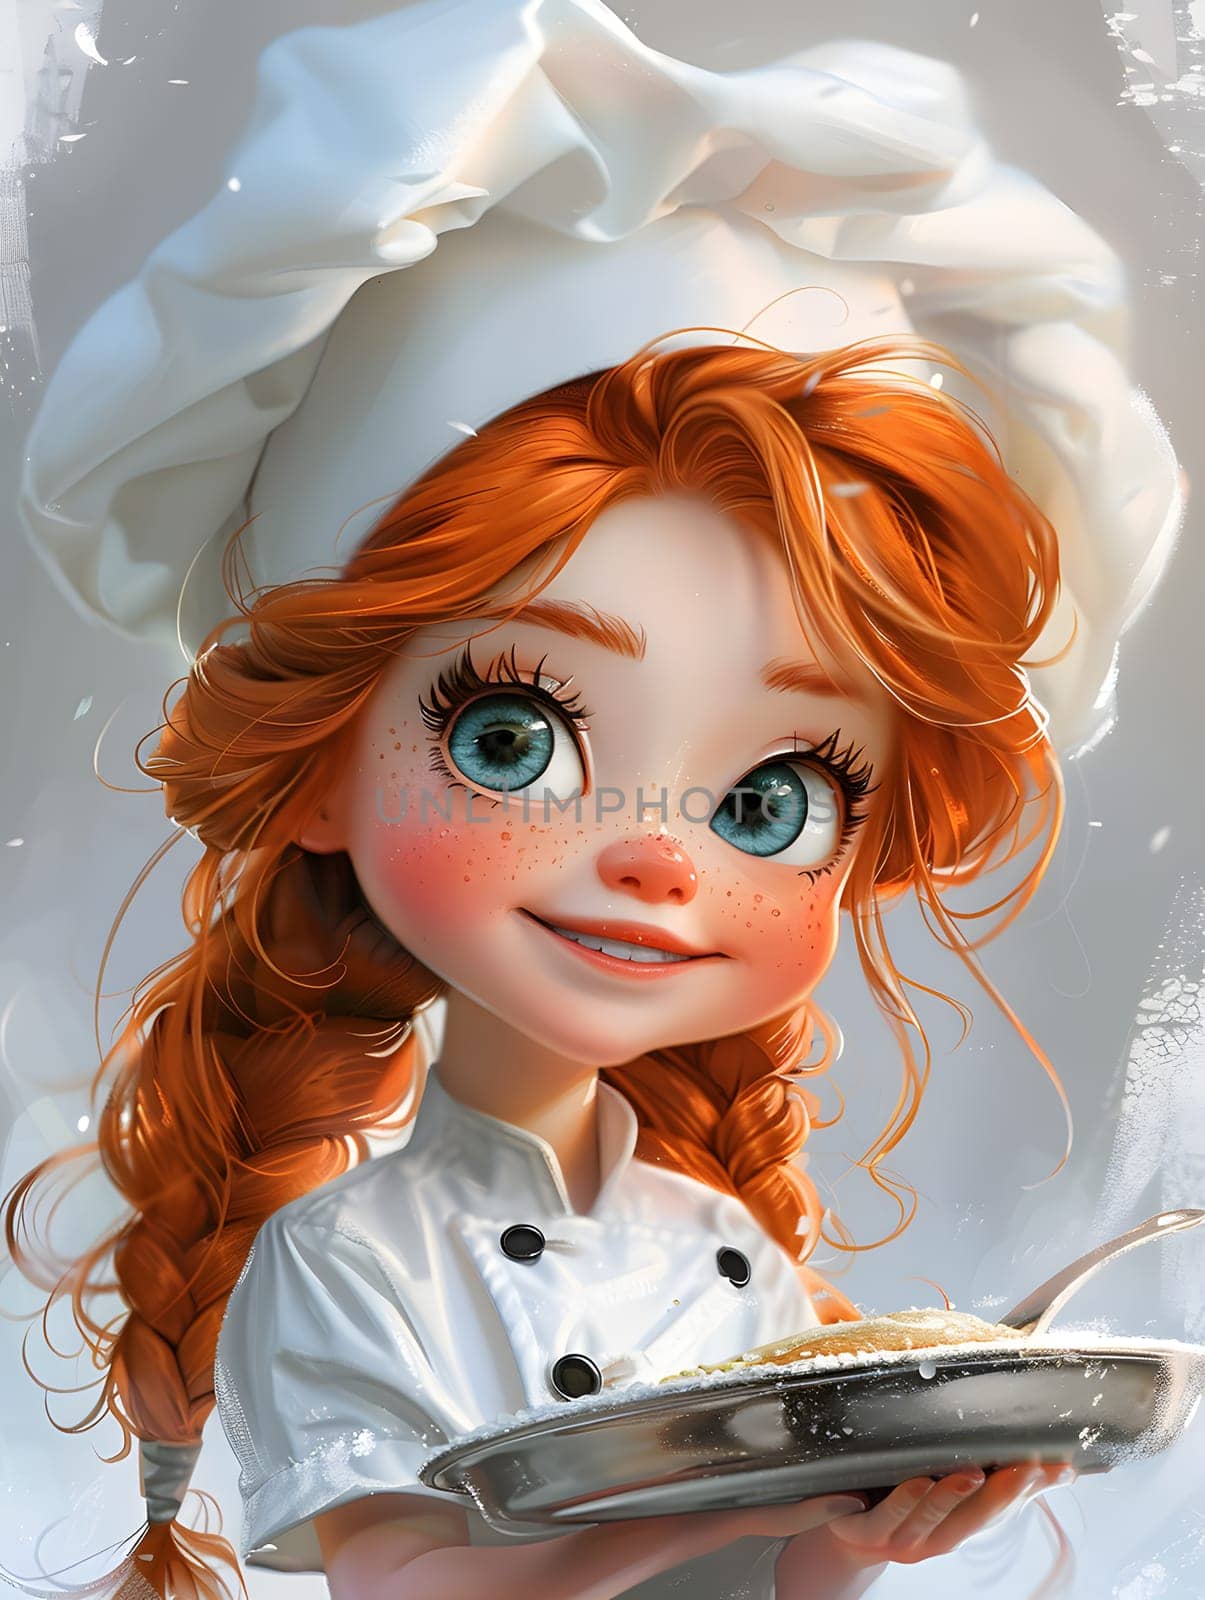 Cute cartoon girl in chefs hat holding plate of food by Nadtochiy